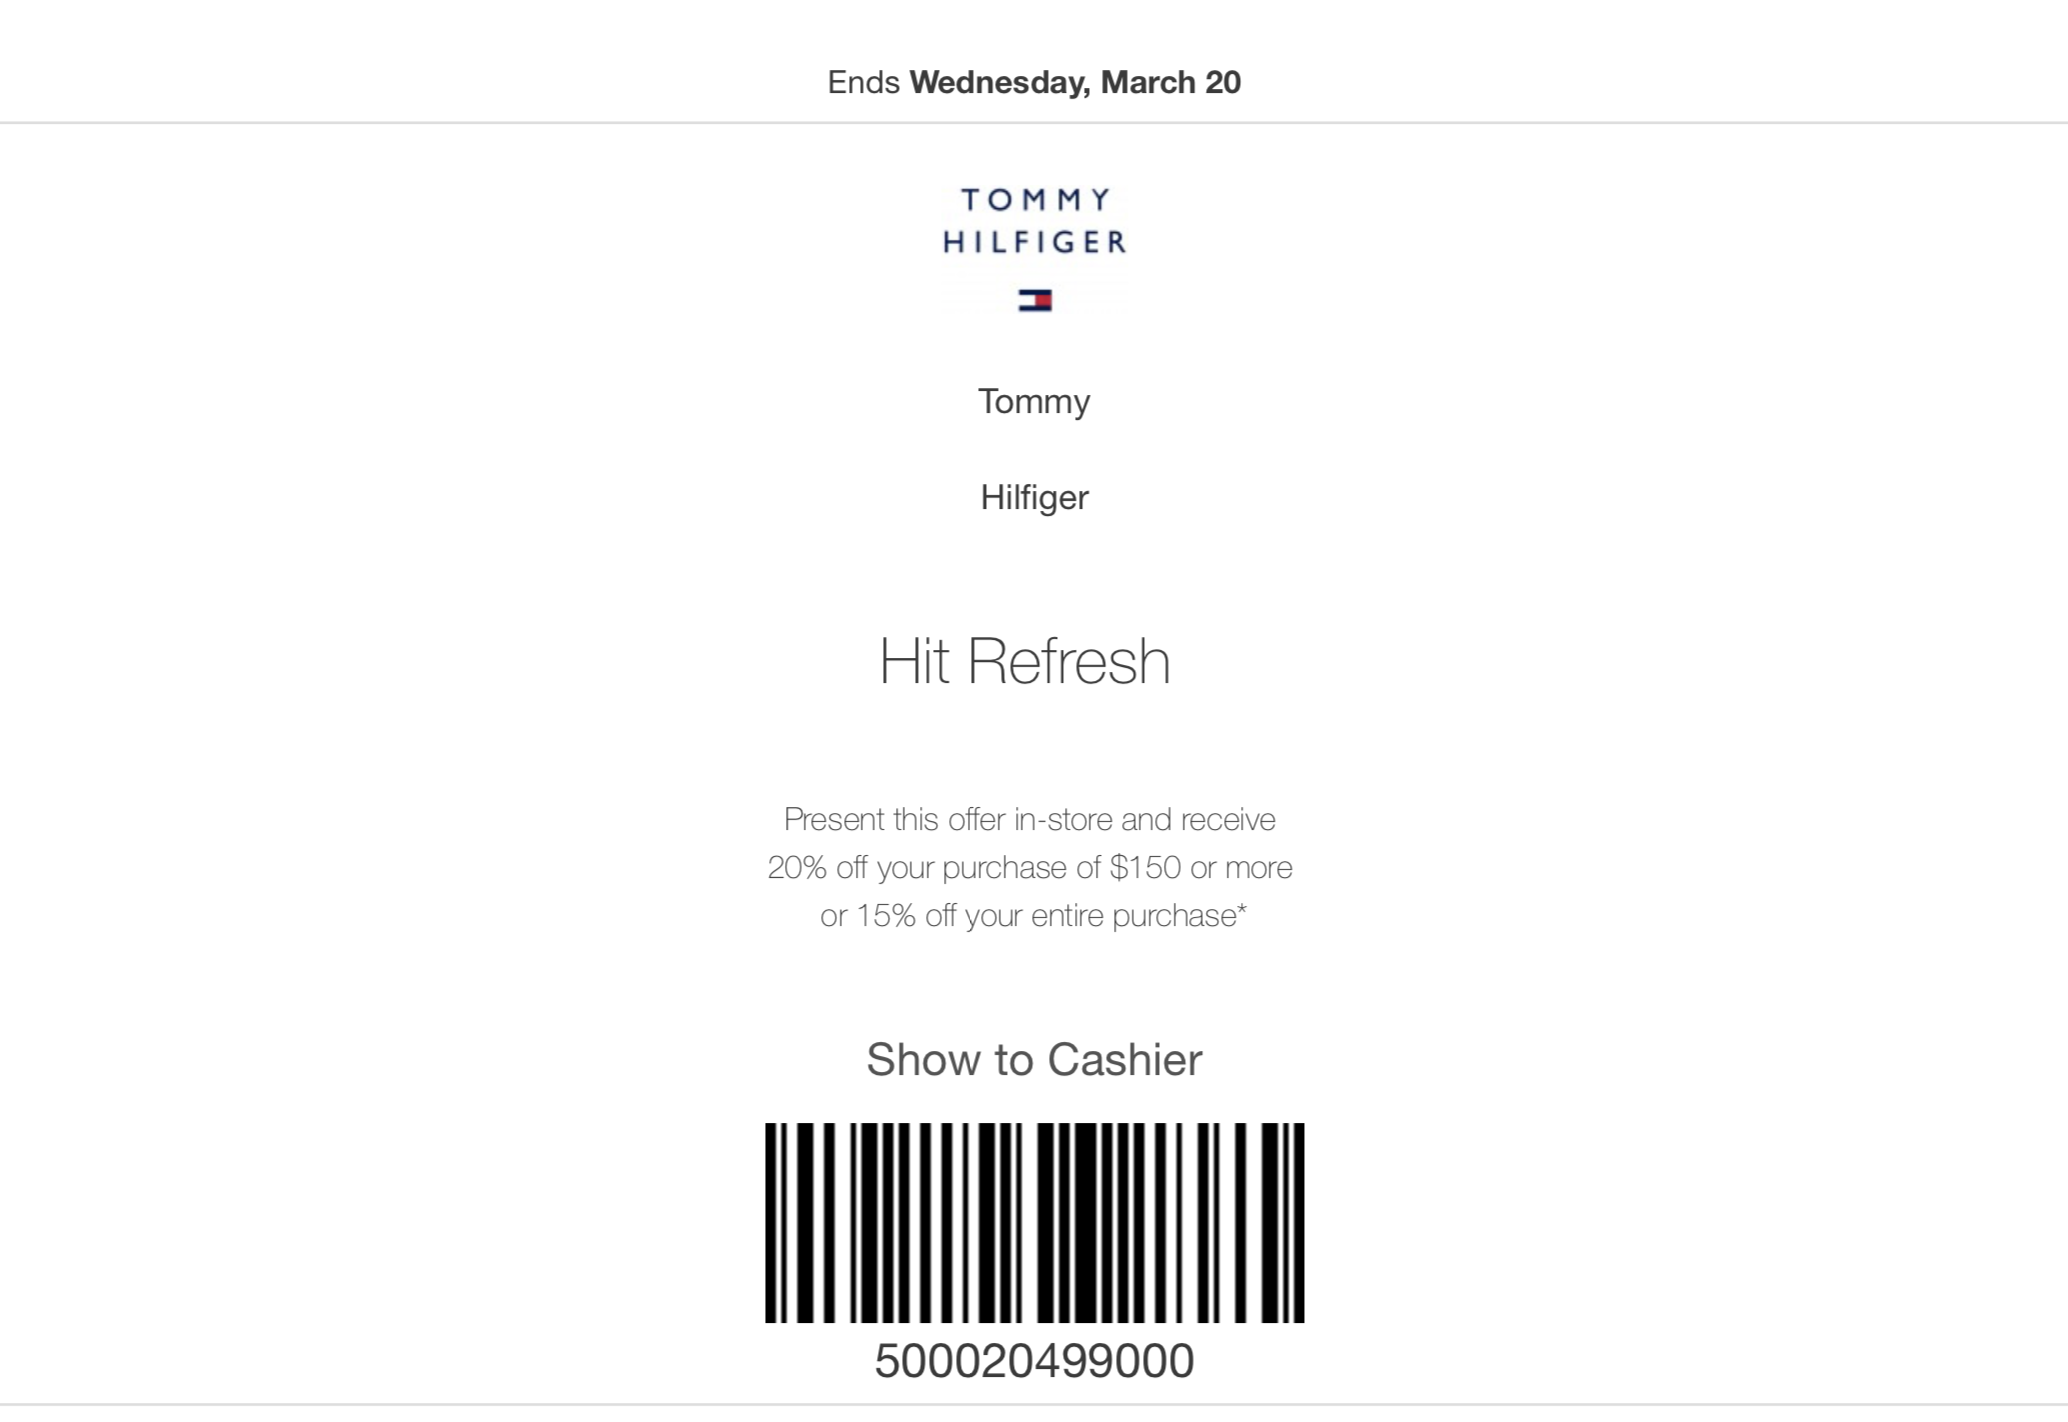 Tommy Hilfiger Coupons Store (Printable Coupons) 2019